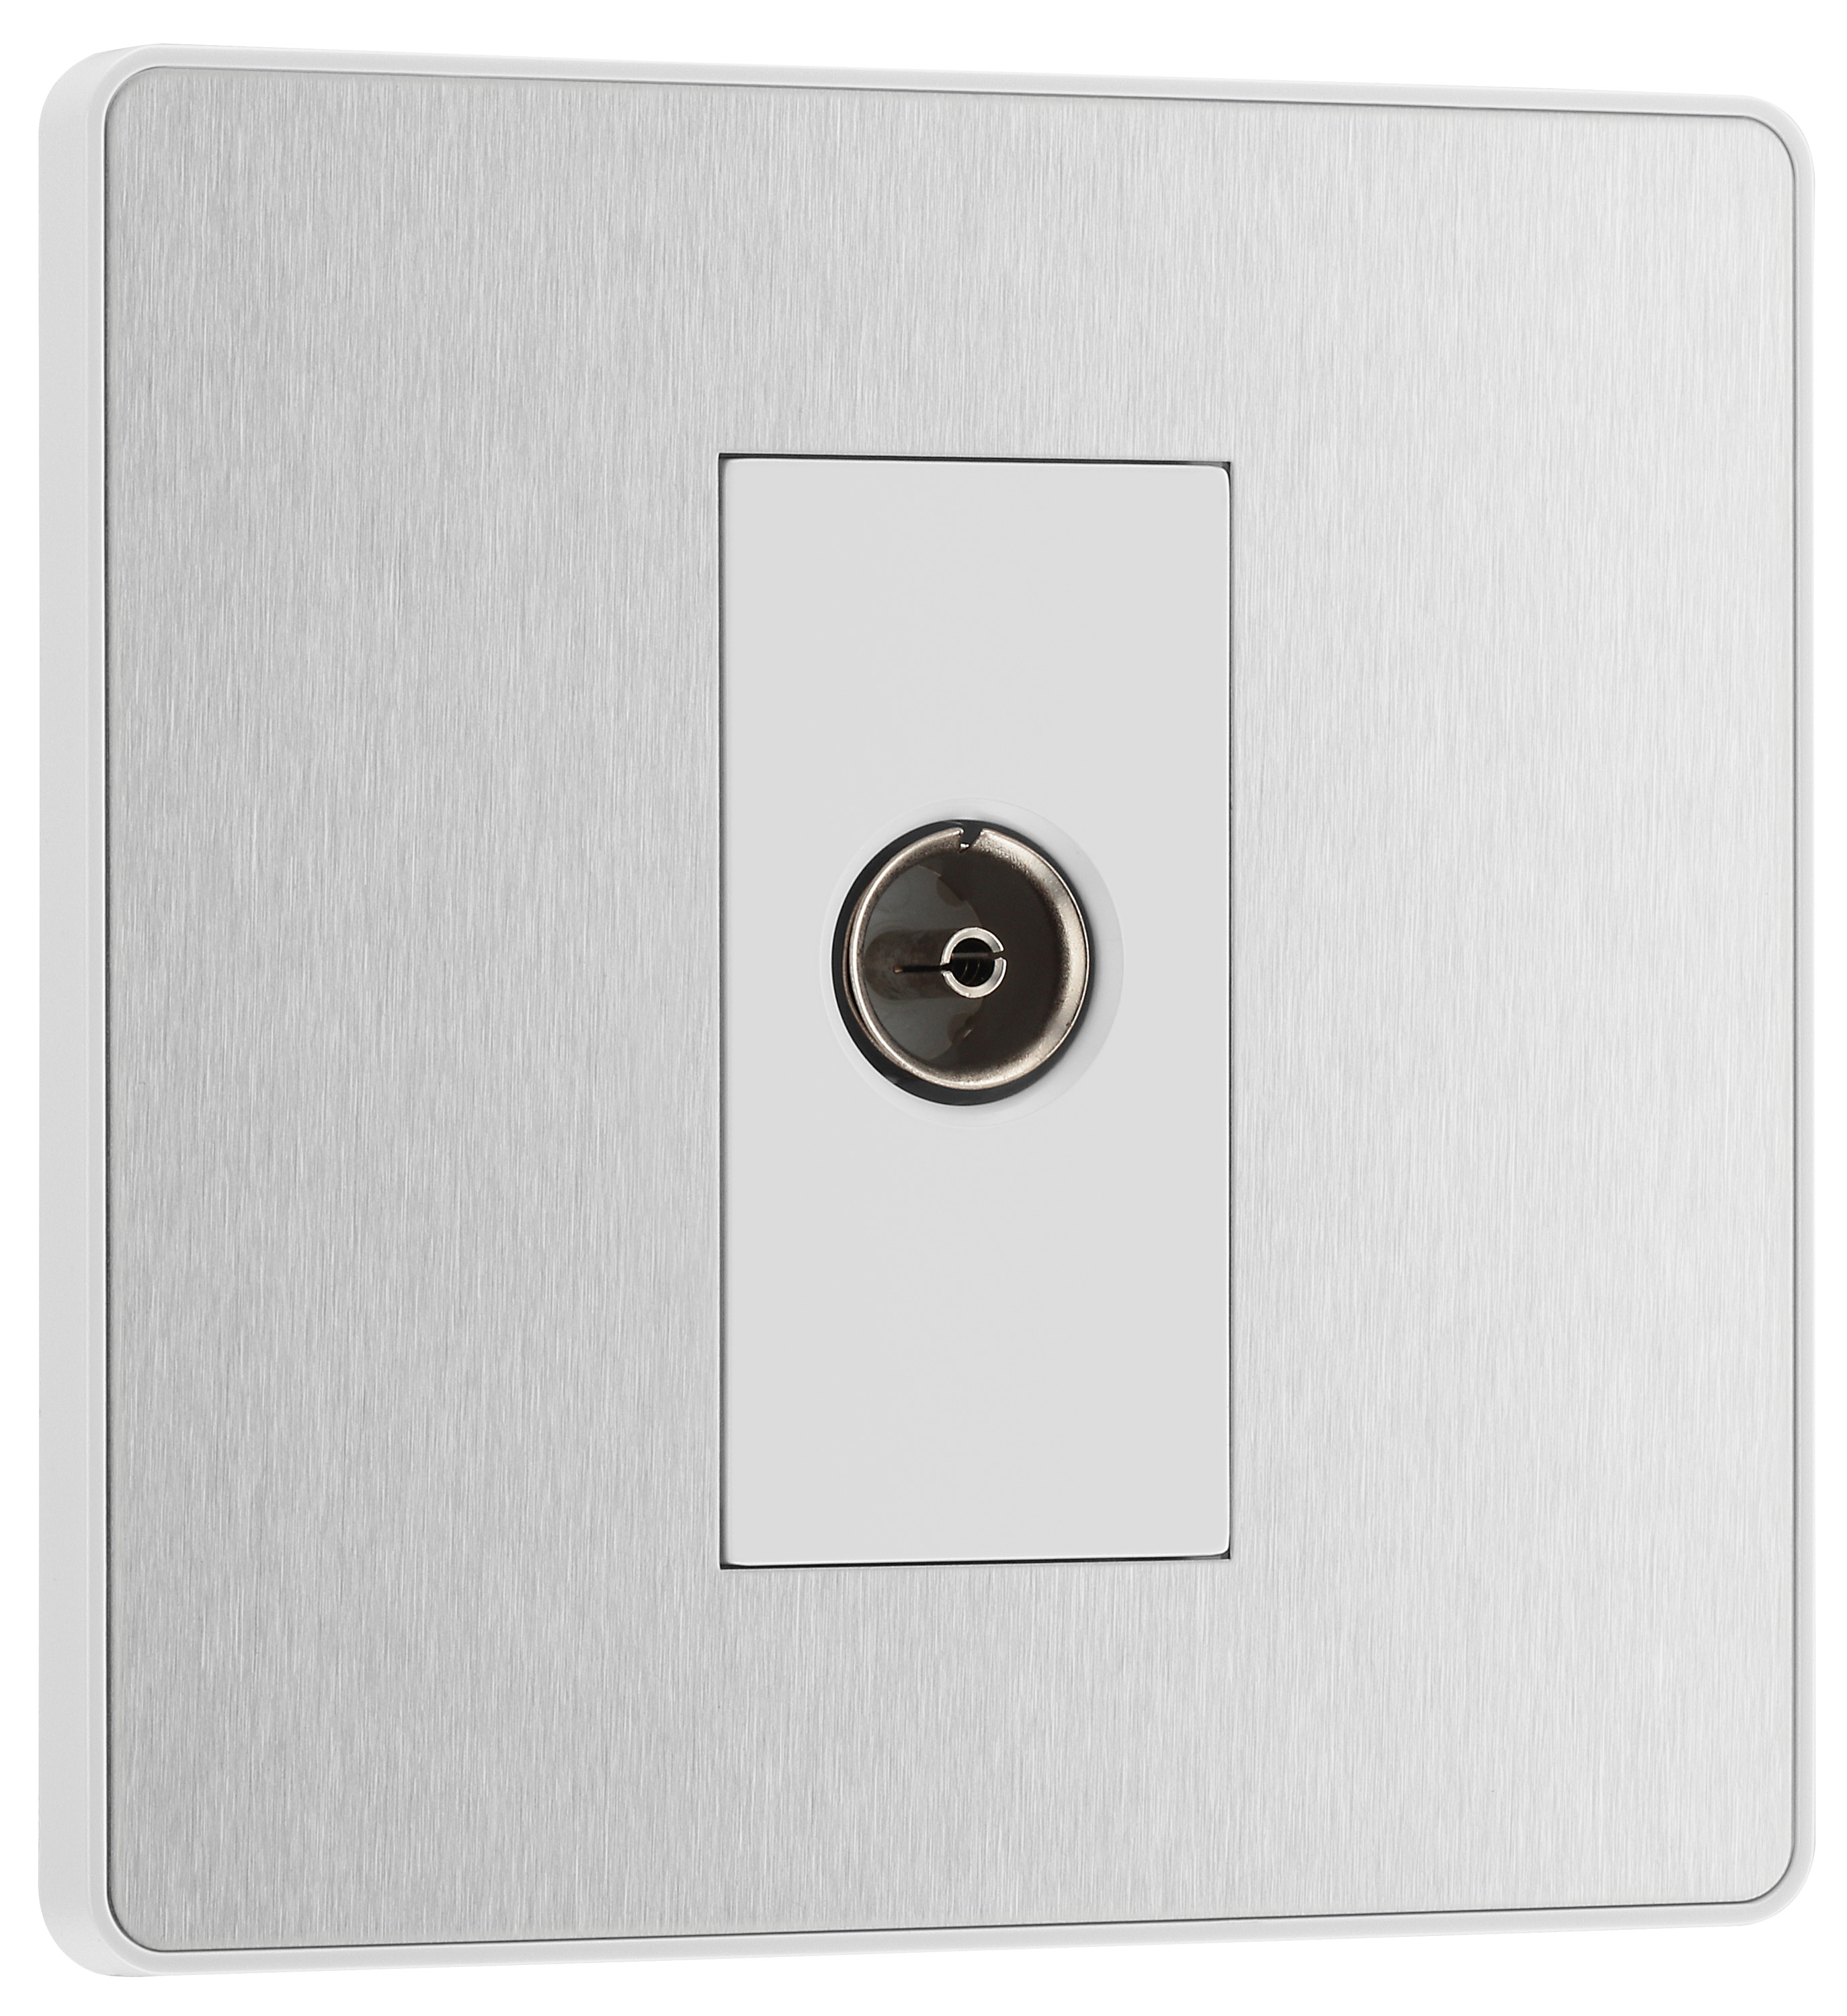 Image of BG Evolve Brushed Steel Single Socket for Tv or Fm Co-Axial Aerial Connection